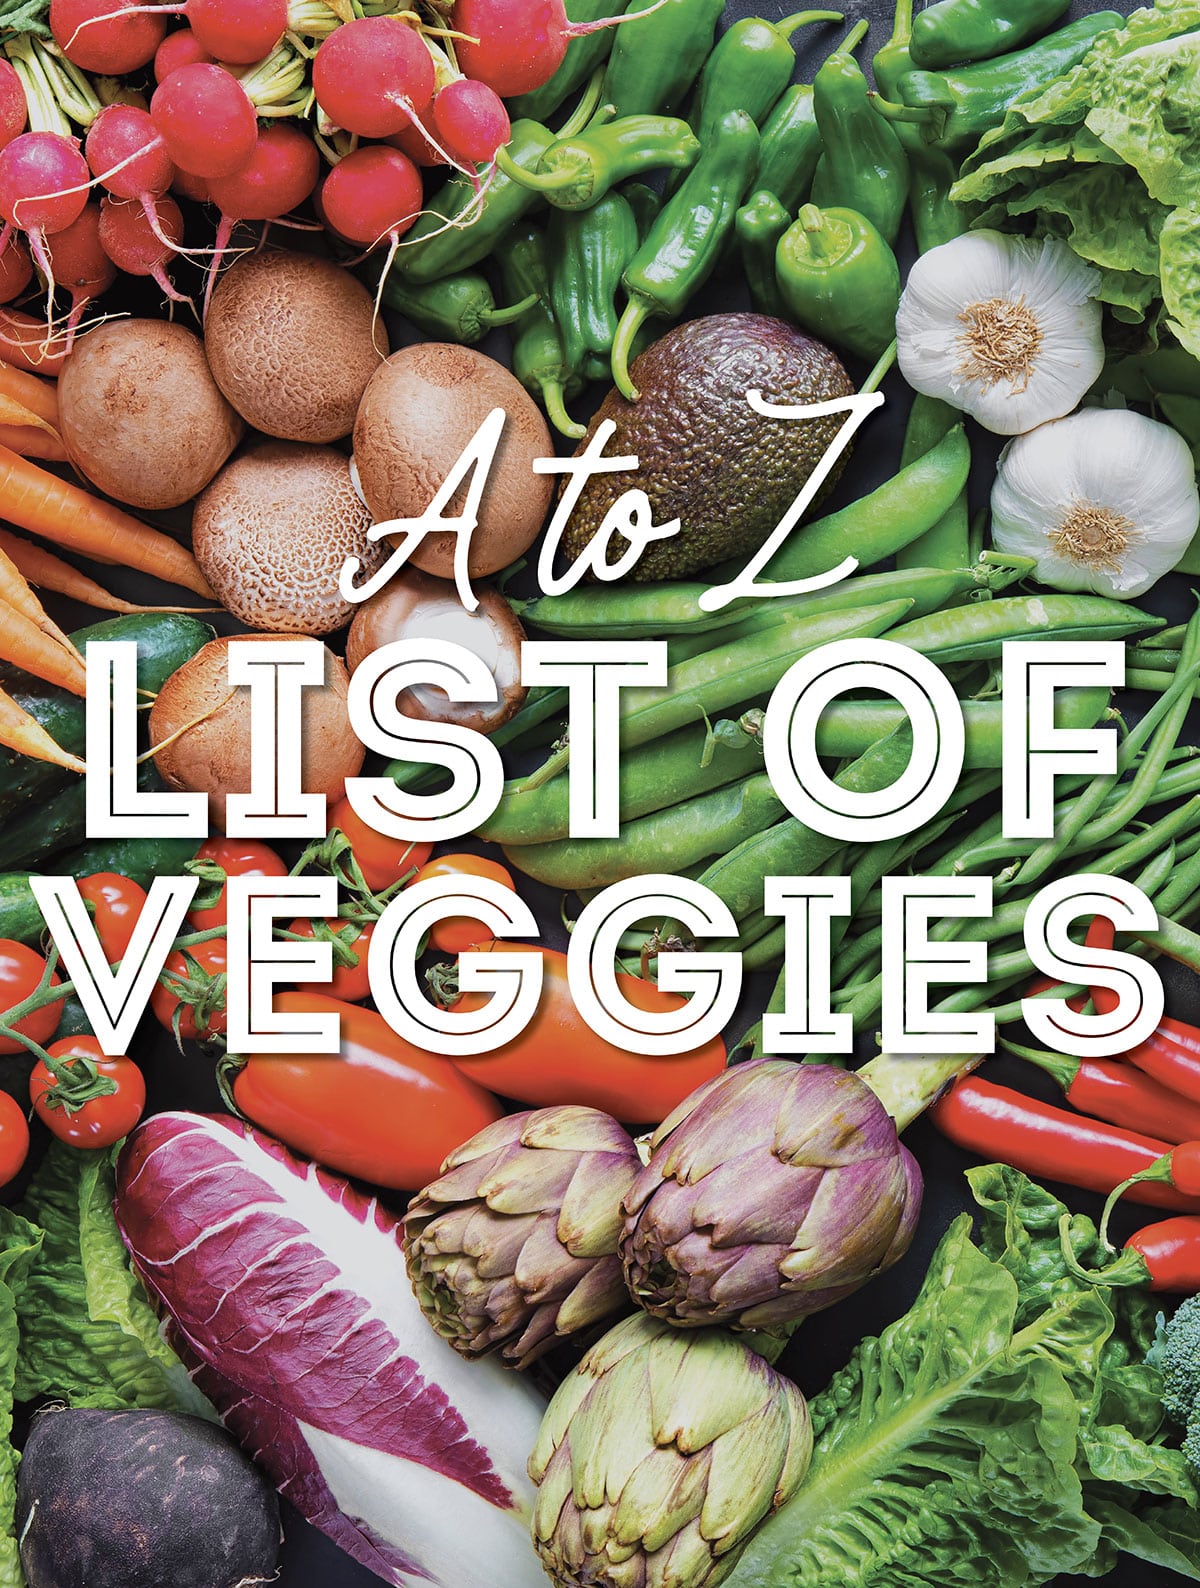 Collage that says "A to Z List Of Veggies".